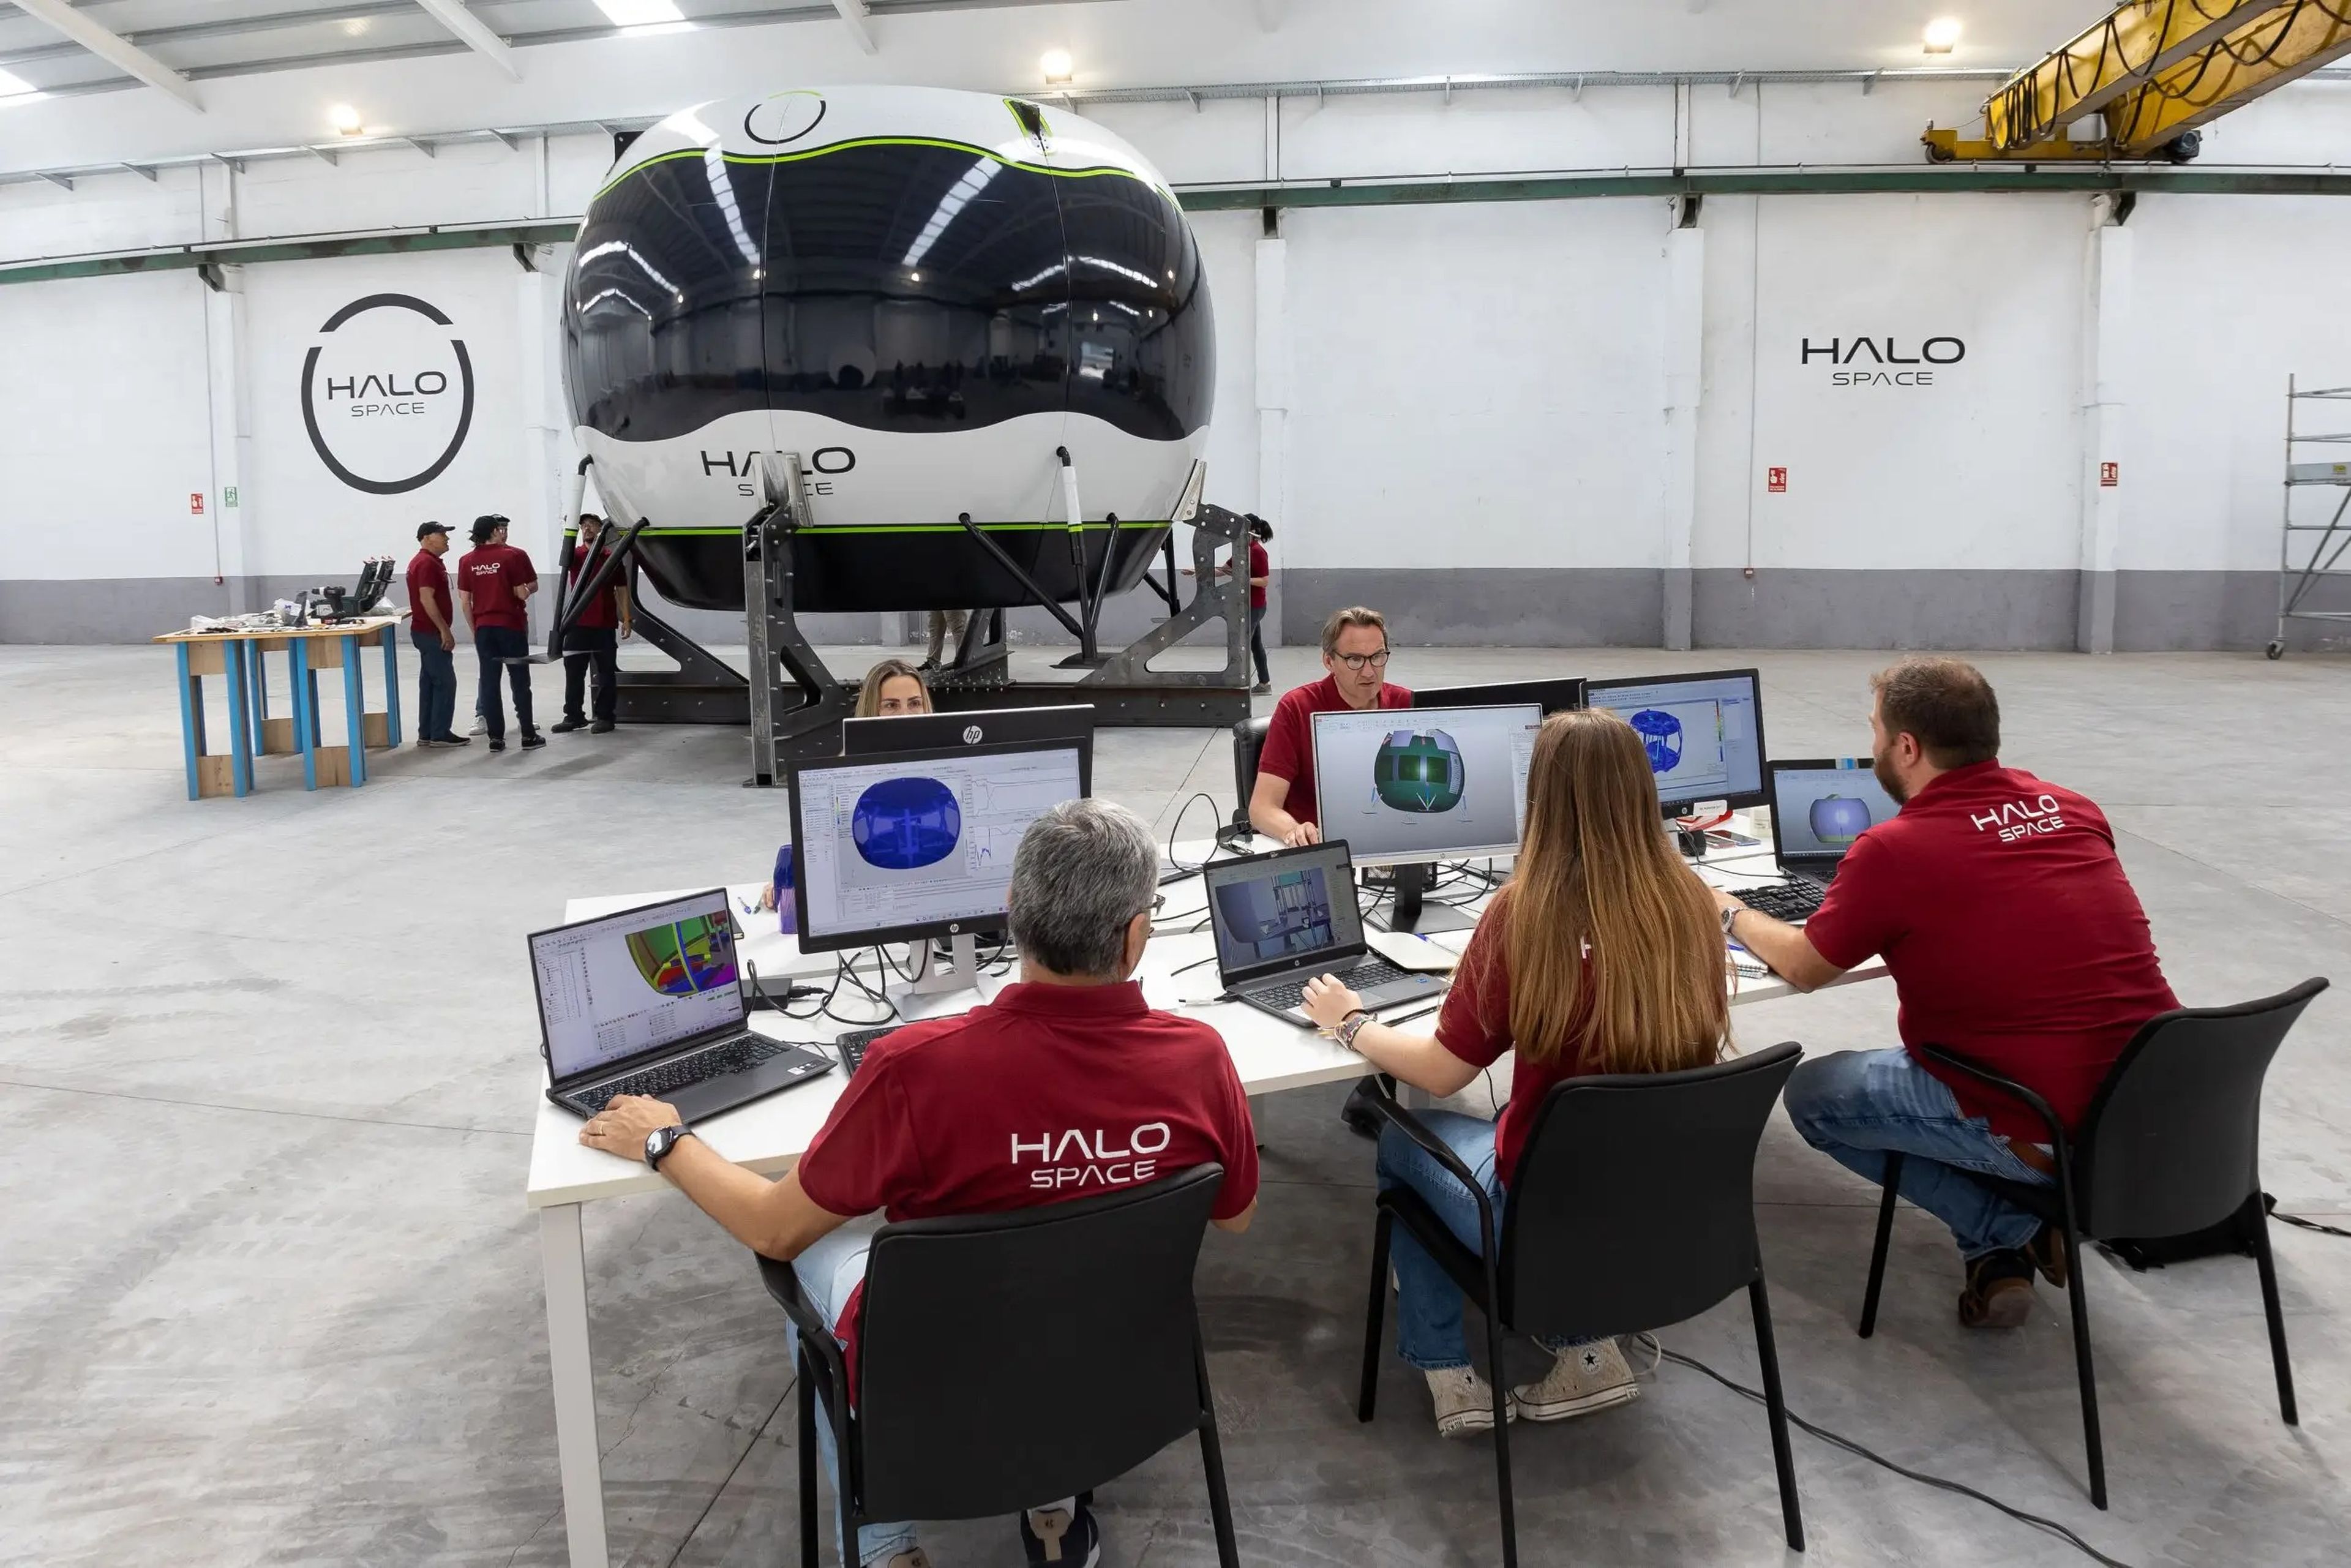 A Halo Space capsule in a hangar, and five employees sat at computers nearby wearing red shirts emblazoned with the company's name.